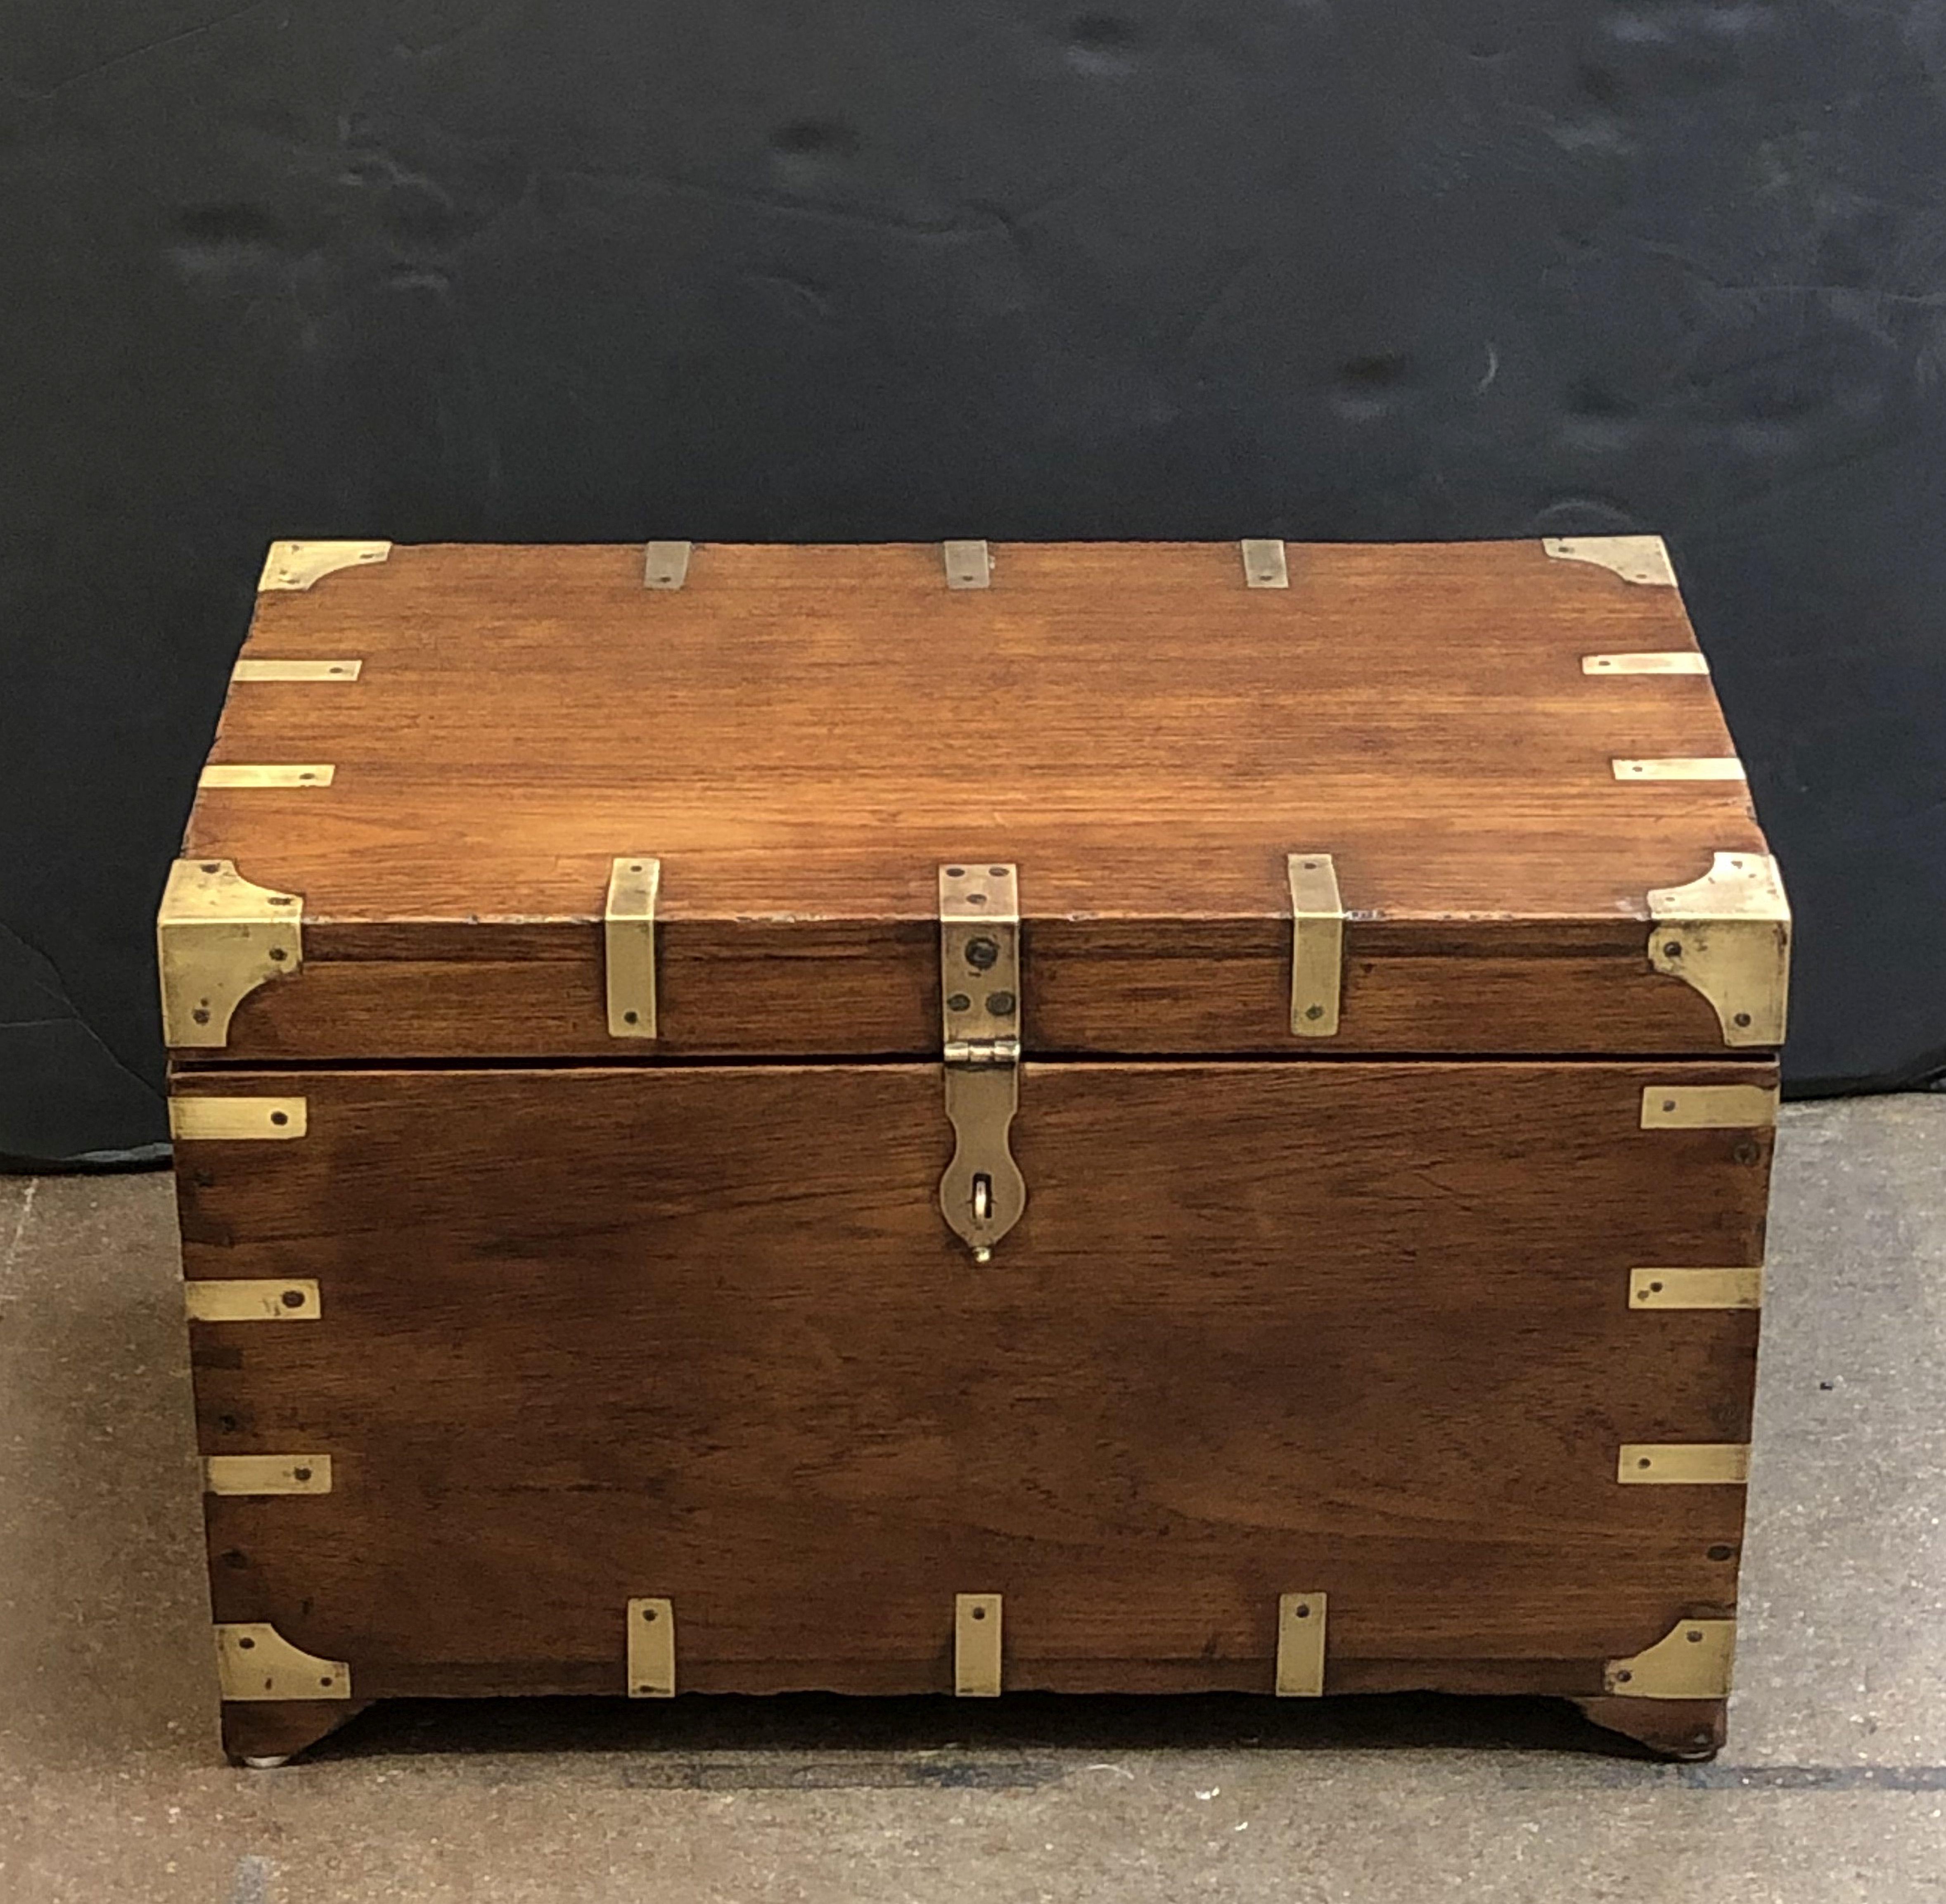 A handsome rectangular British military officer's Campaign trunk of teak featuring hand-cut brass binding and hardware, with interior compartments, and resting on bracket feet.

Campaign-era trunks and coffers were the travel items of British